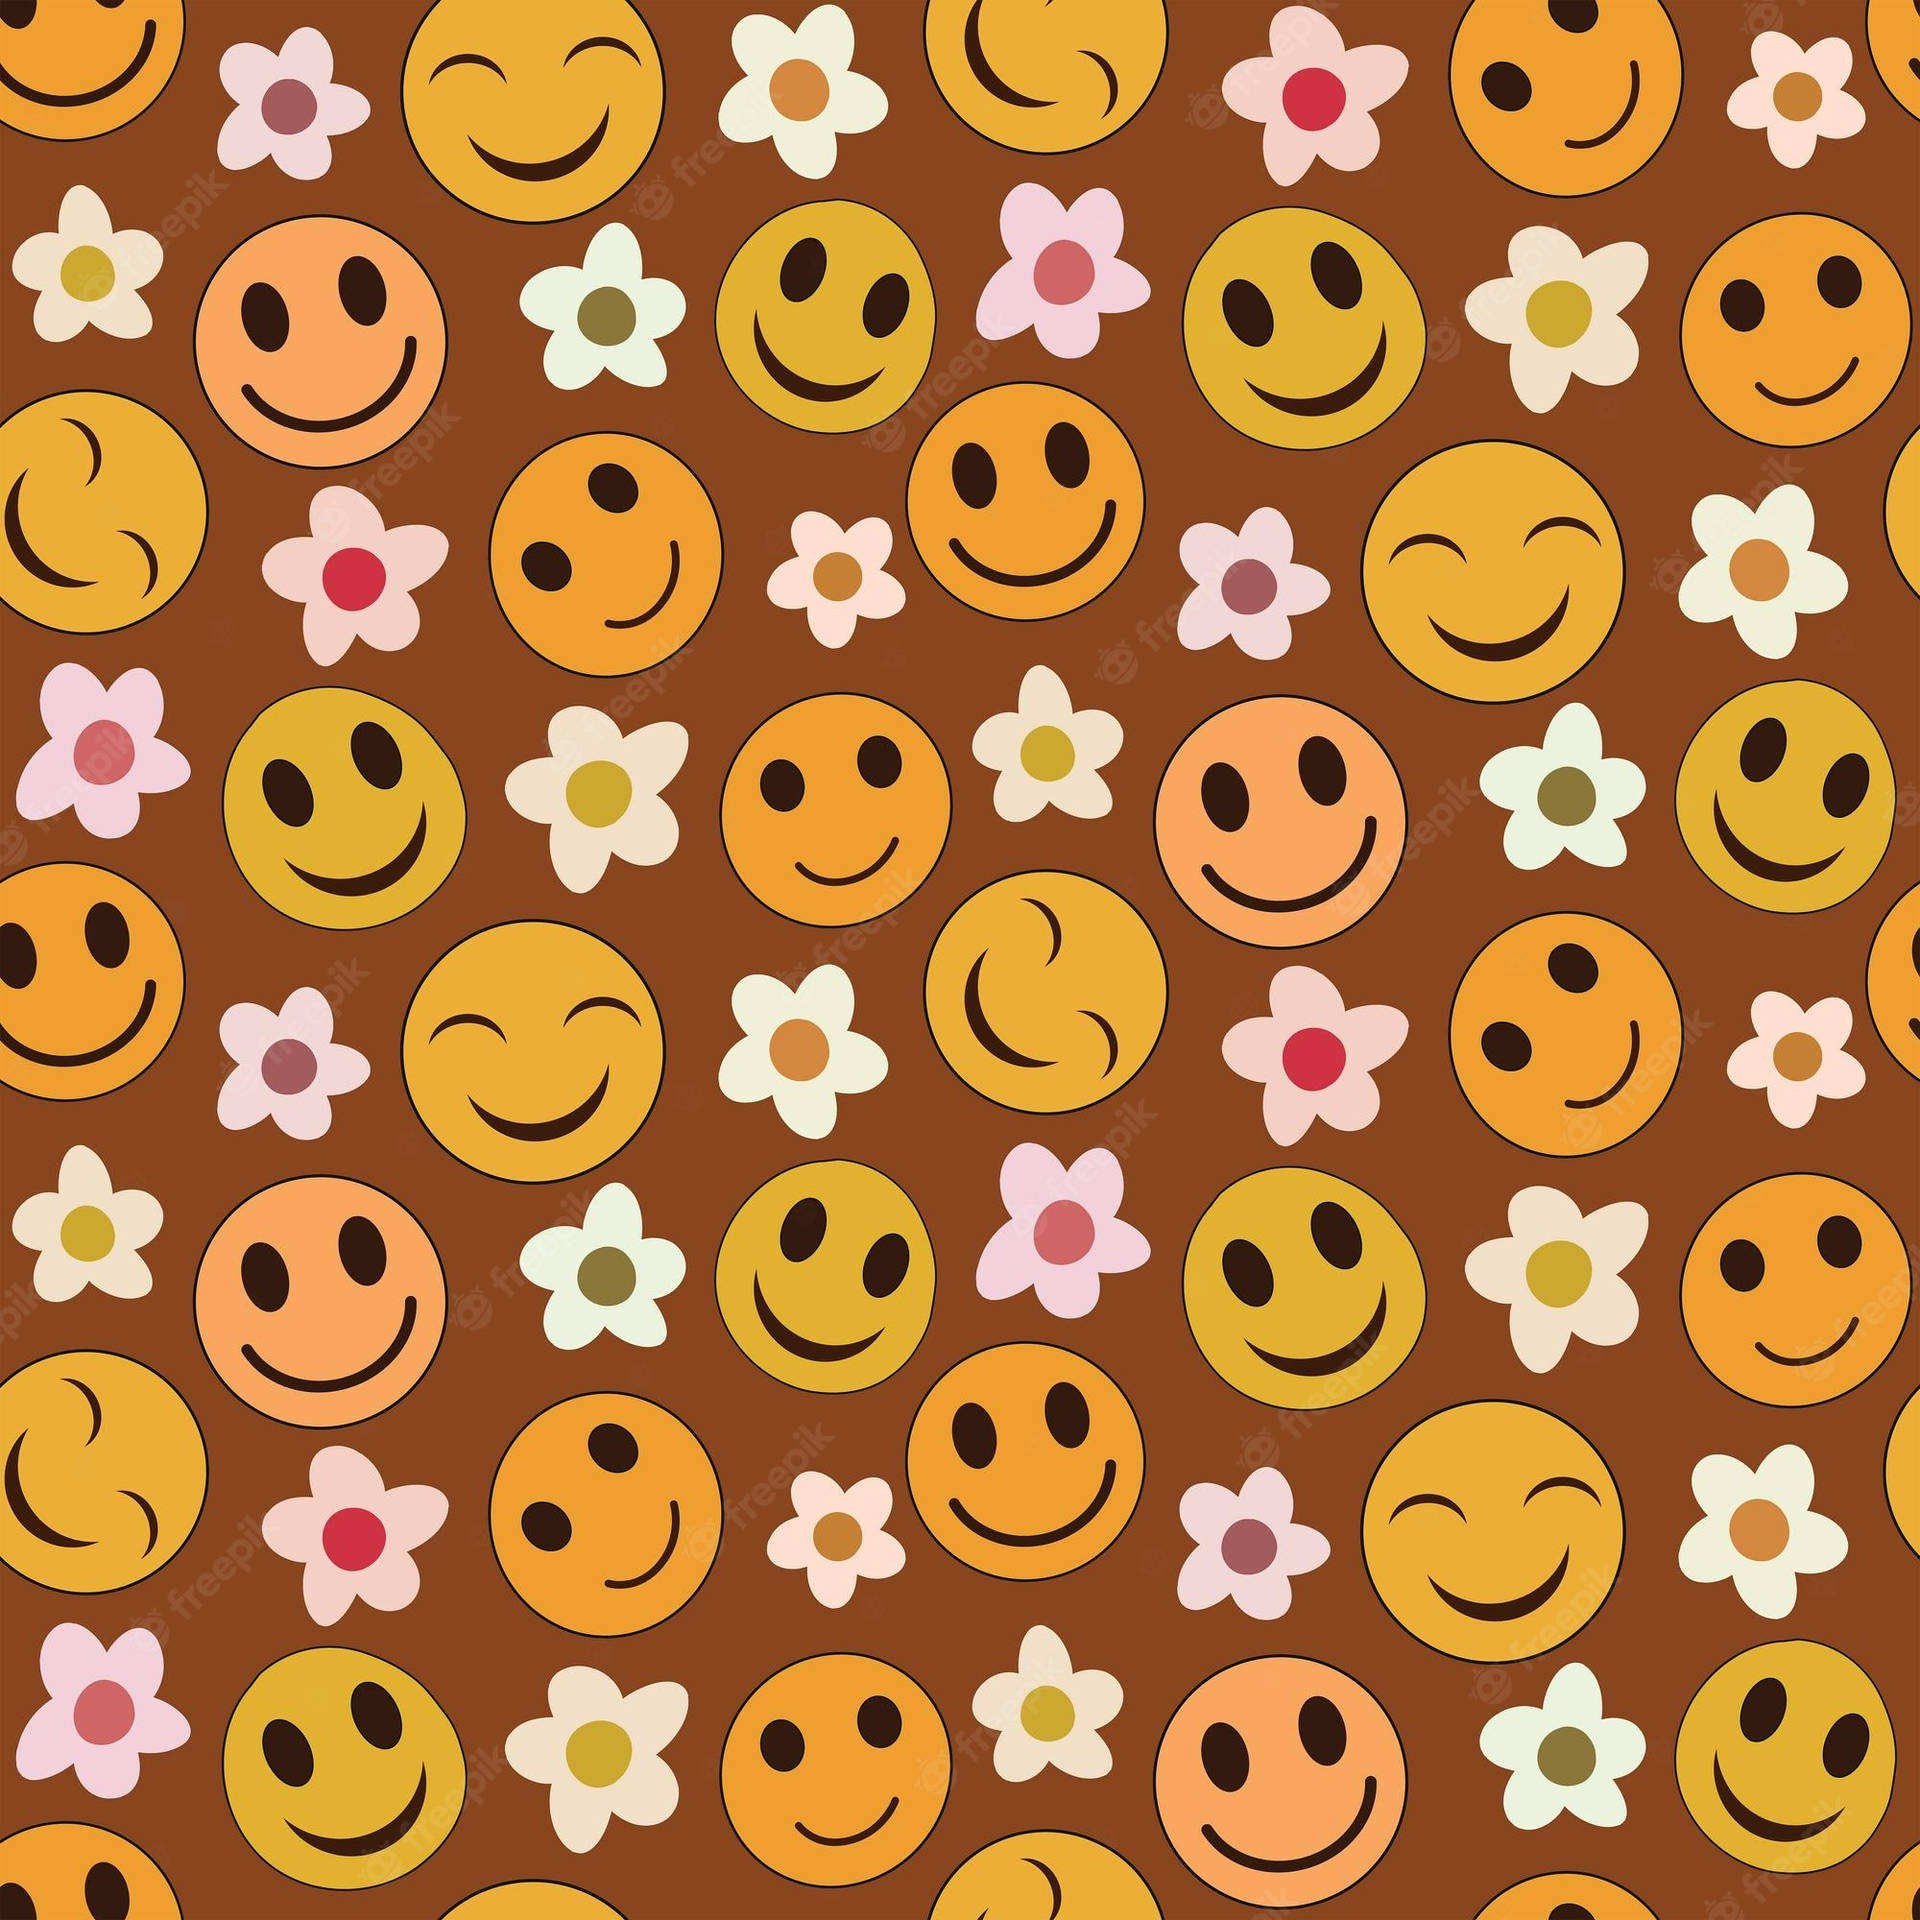 Preppy Smiley Face And Flowers Wallpaper